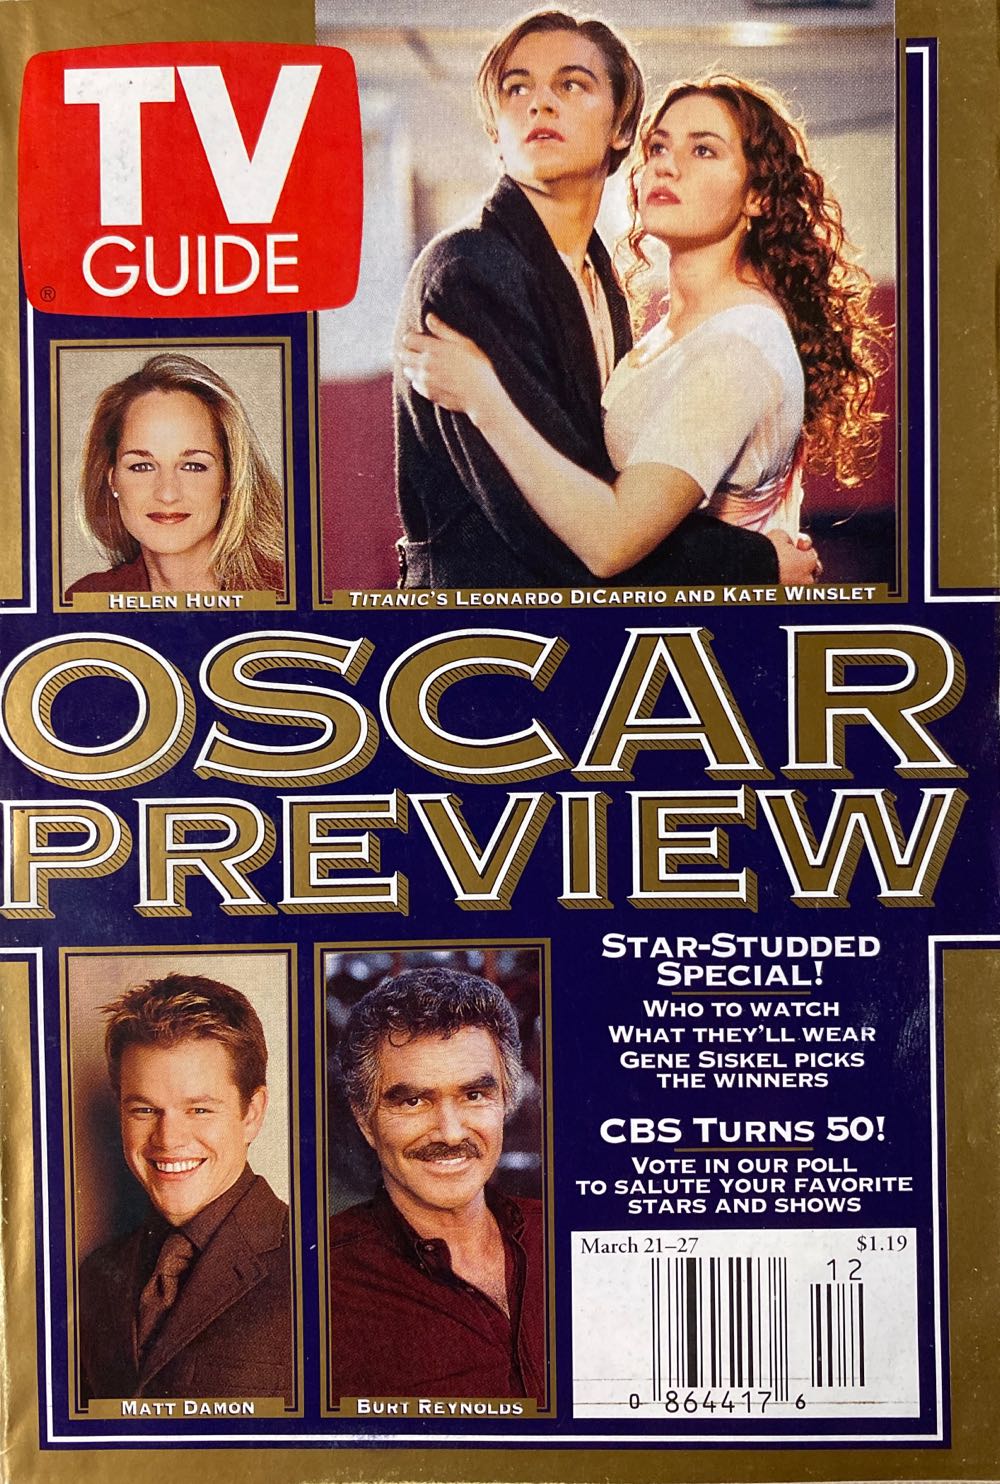 TV Guide #2347  (March) magazine collectible - Main Image 1